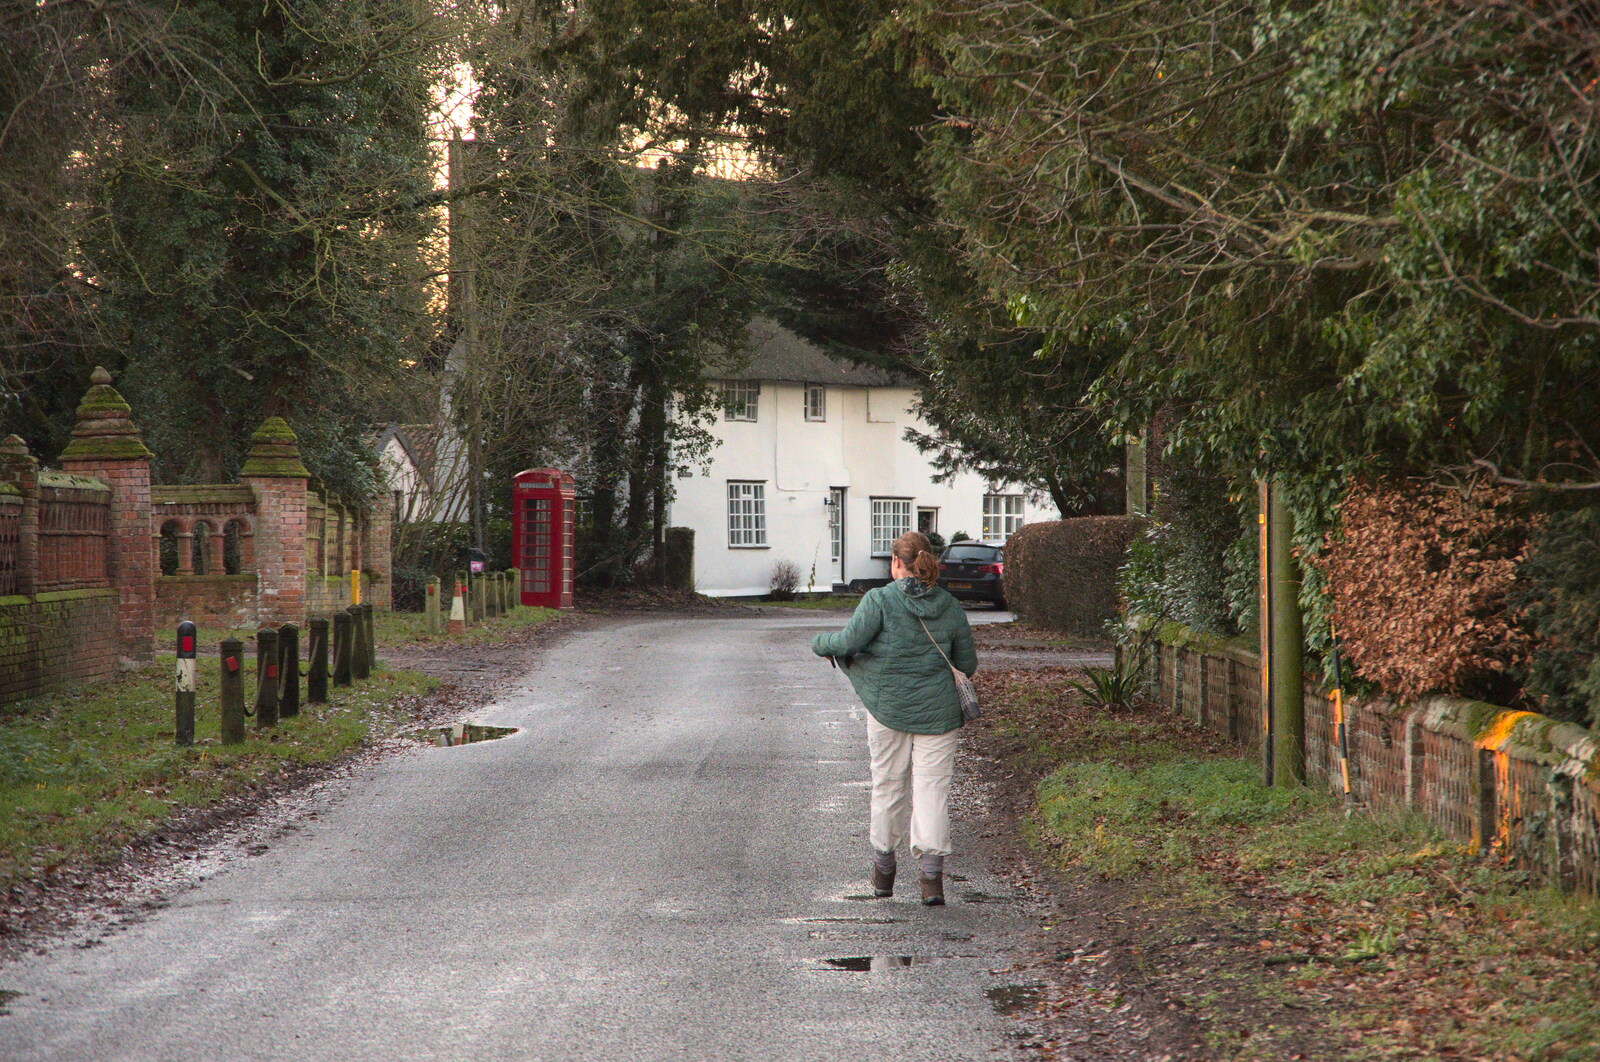 Winter Walks around Brome and Hoxne, Suffolk - 2nd January 2023: Isobel outside Brome Hall